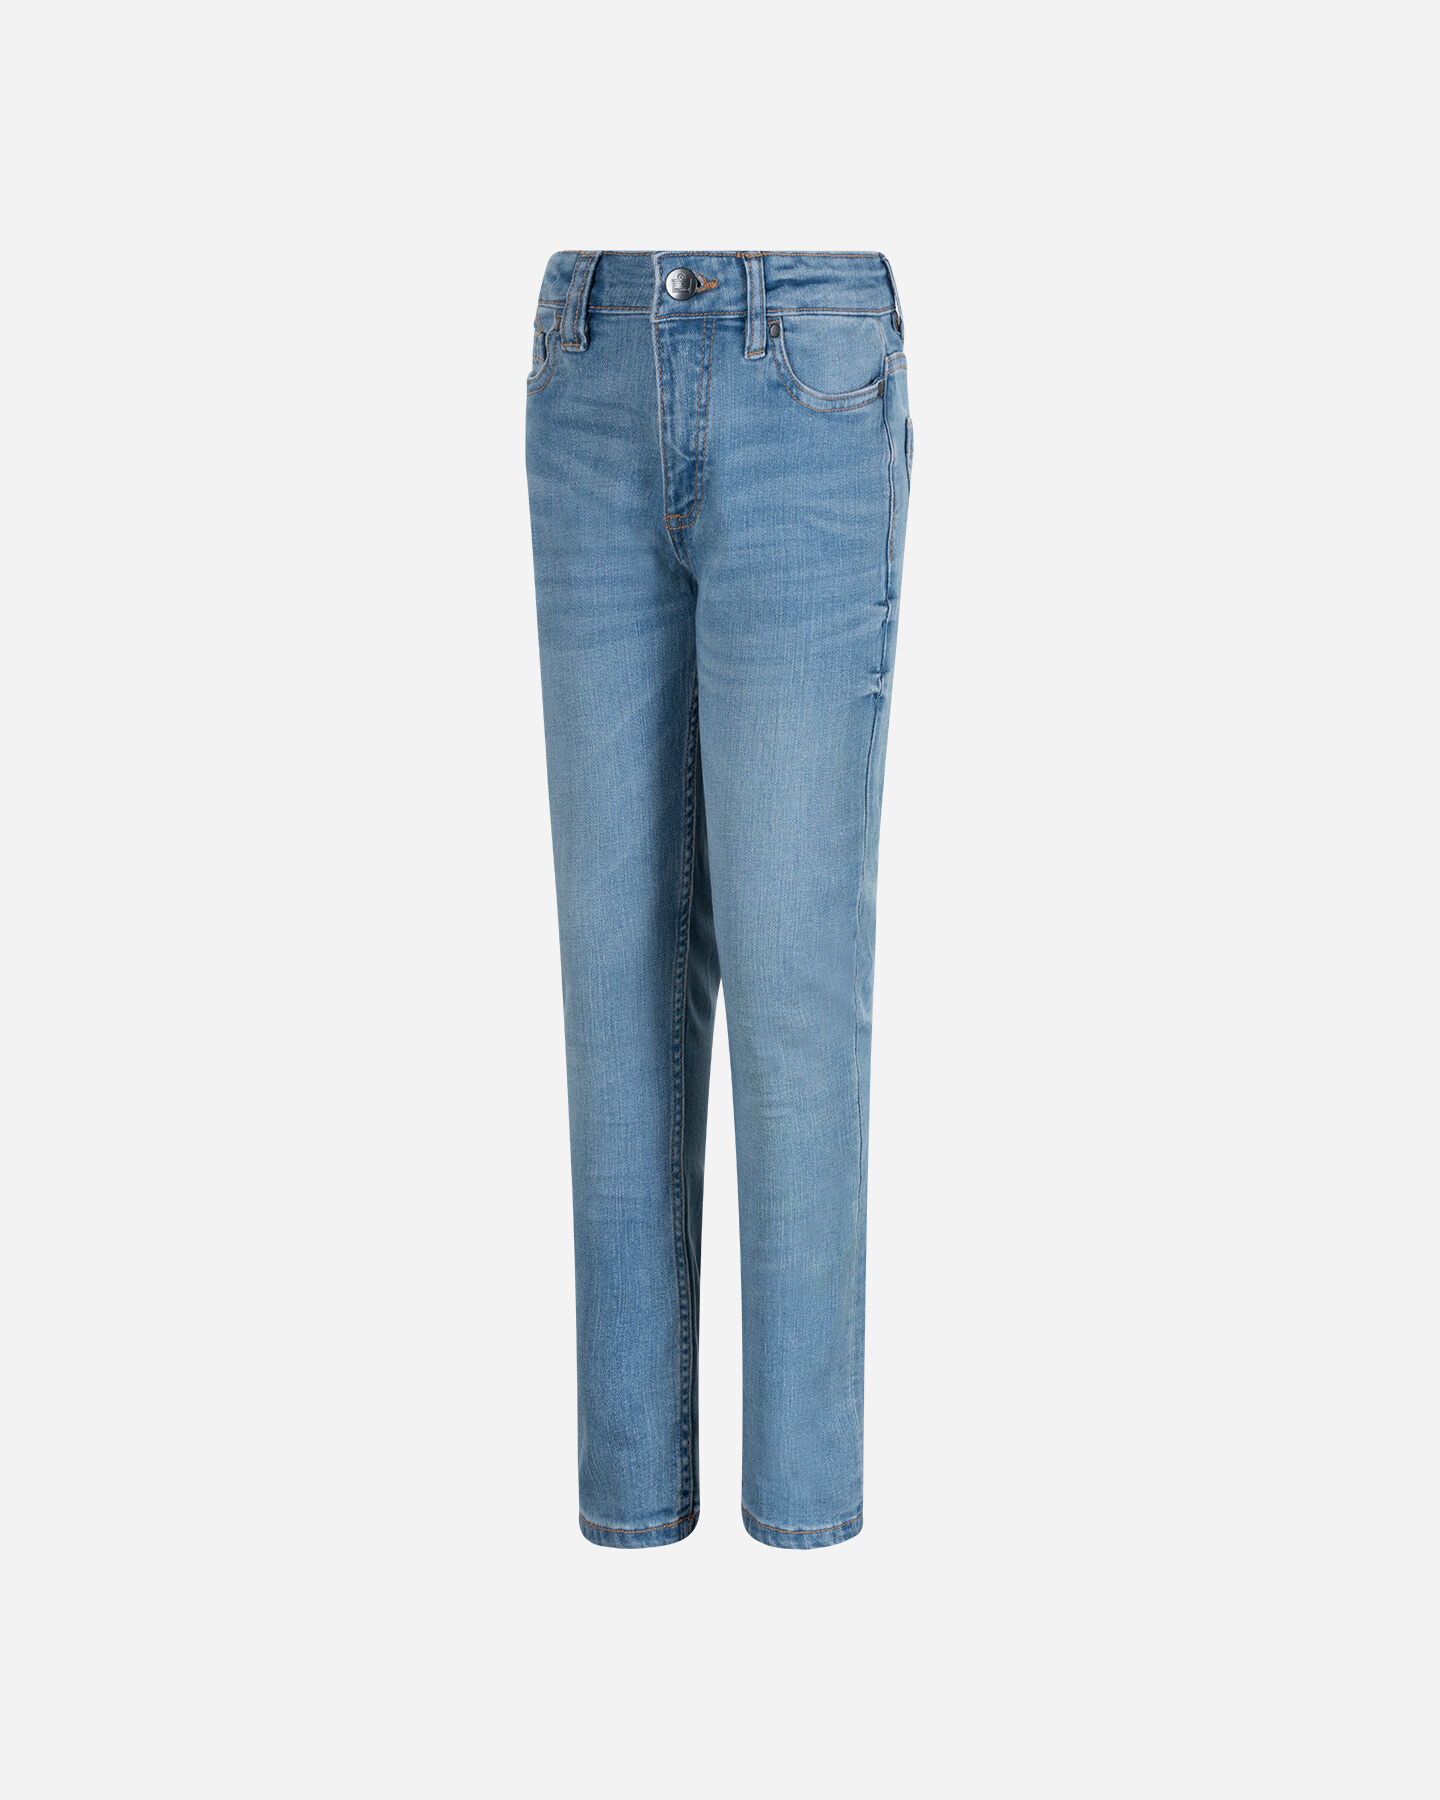  Jeans ADMIRAL LIFESTYLE JR S4119378|LD|4A scatto 0